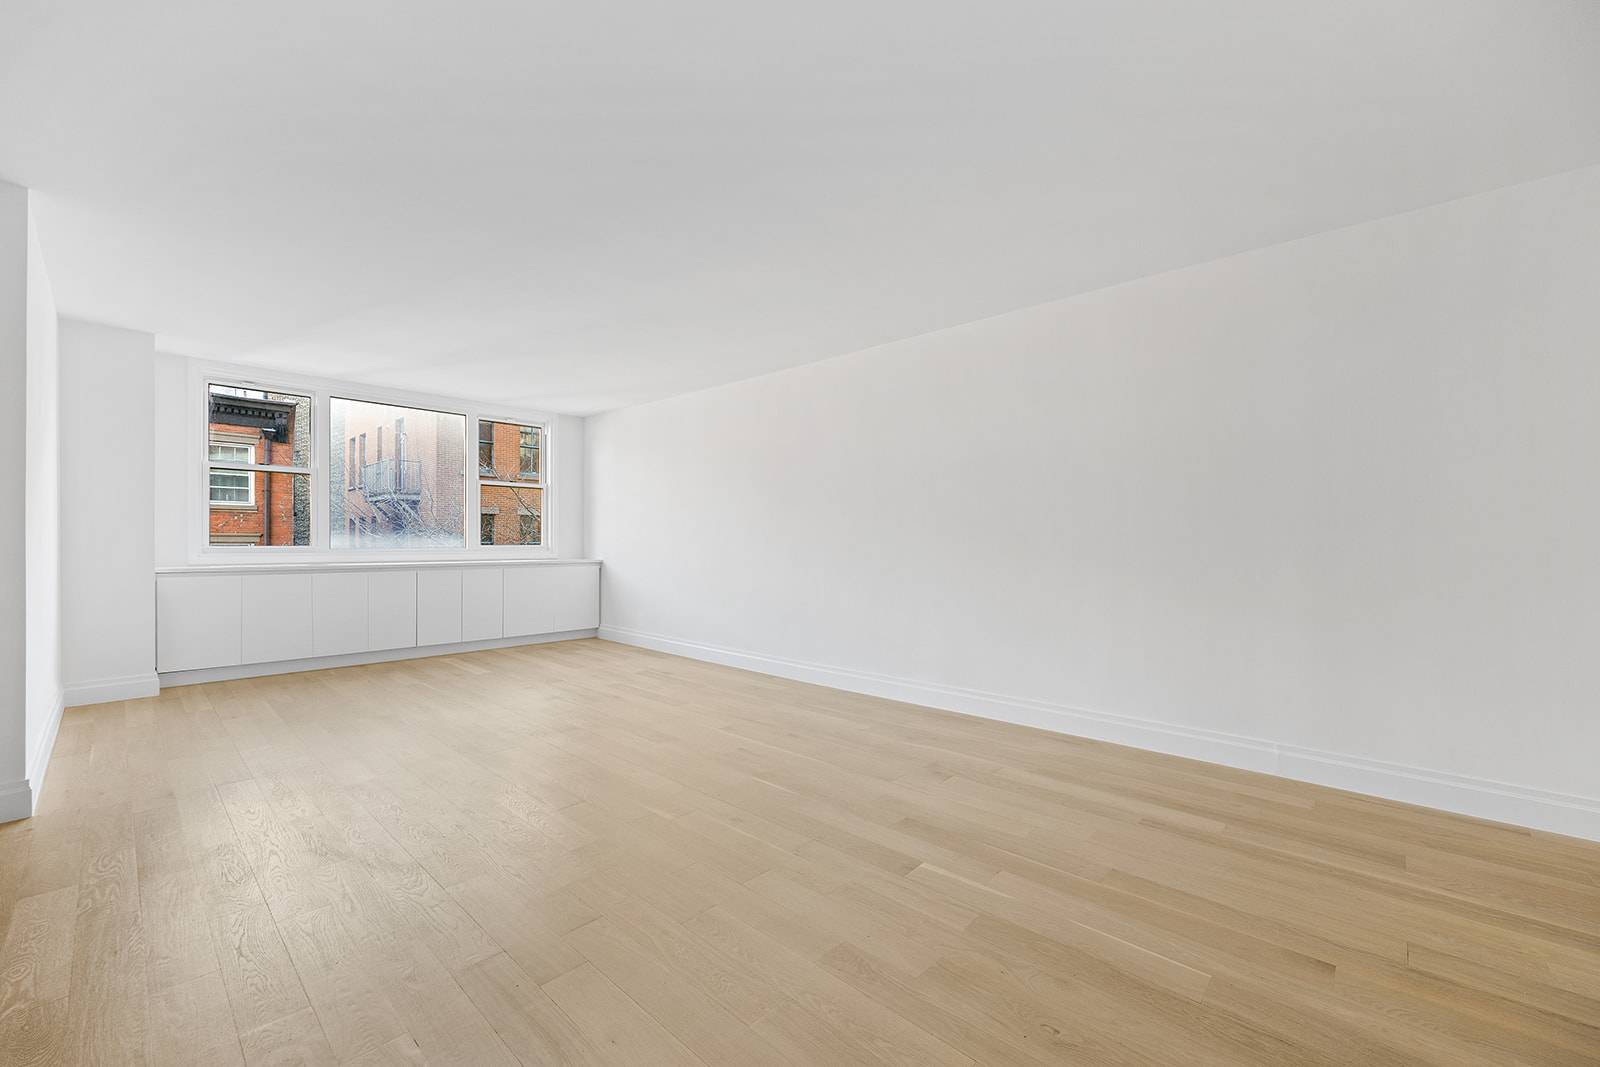 As you enter this spacious mint renovated 1 bedroom Sponsor apartment, be prepared to be wowed by custom finishes and West Village charming views.